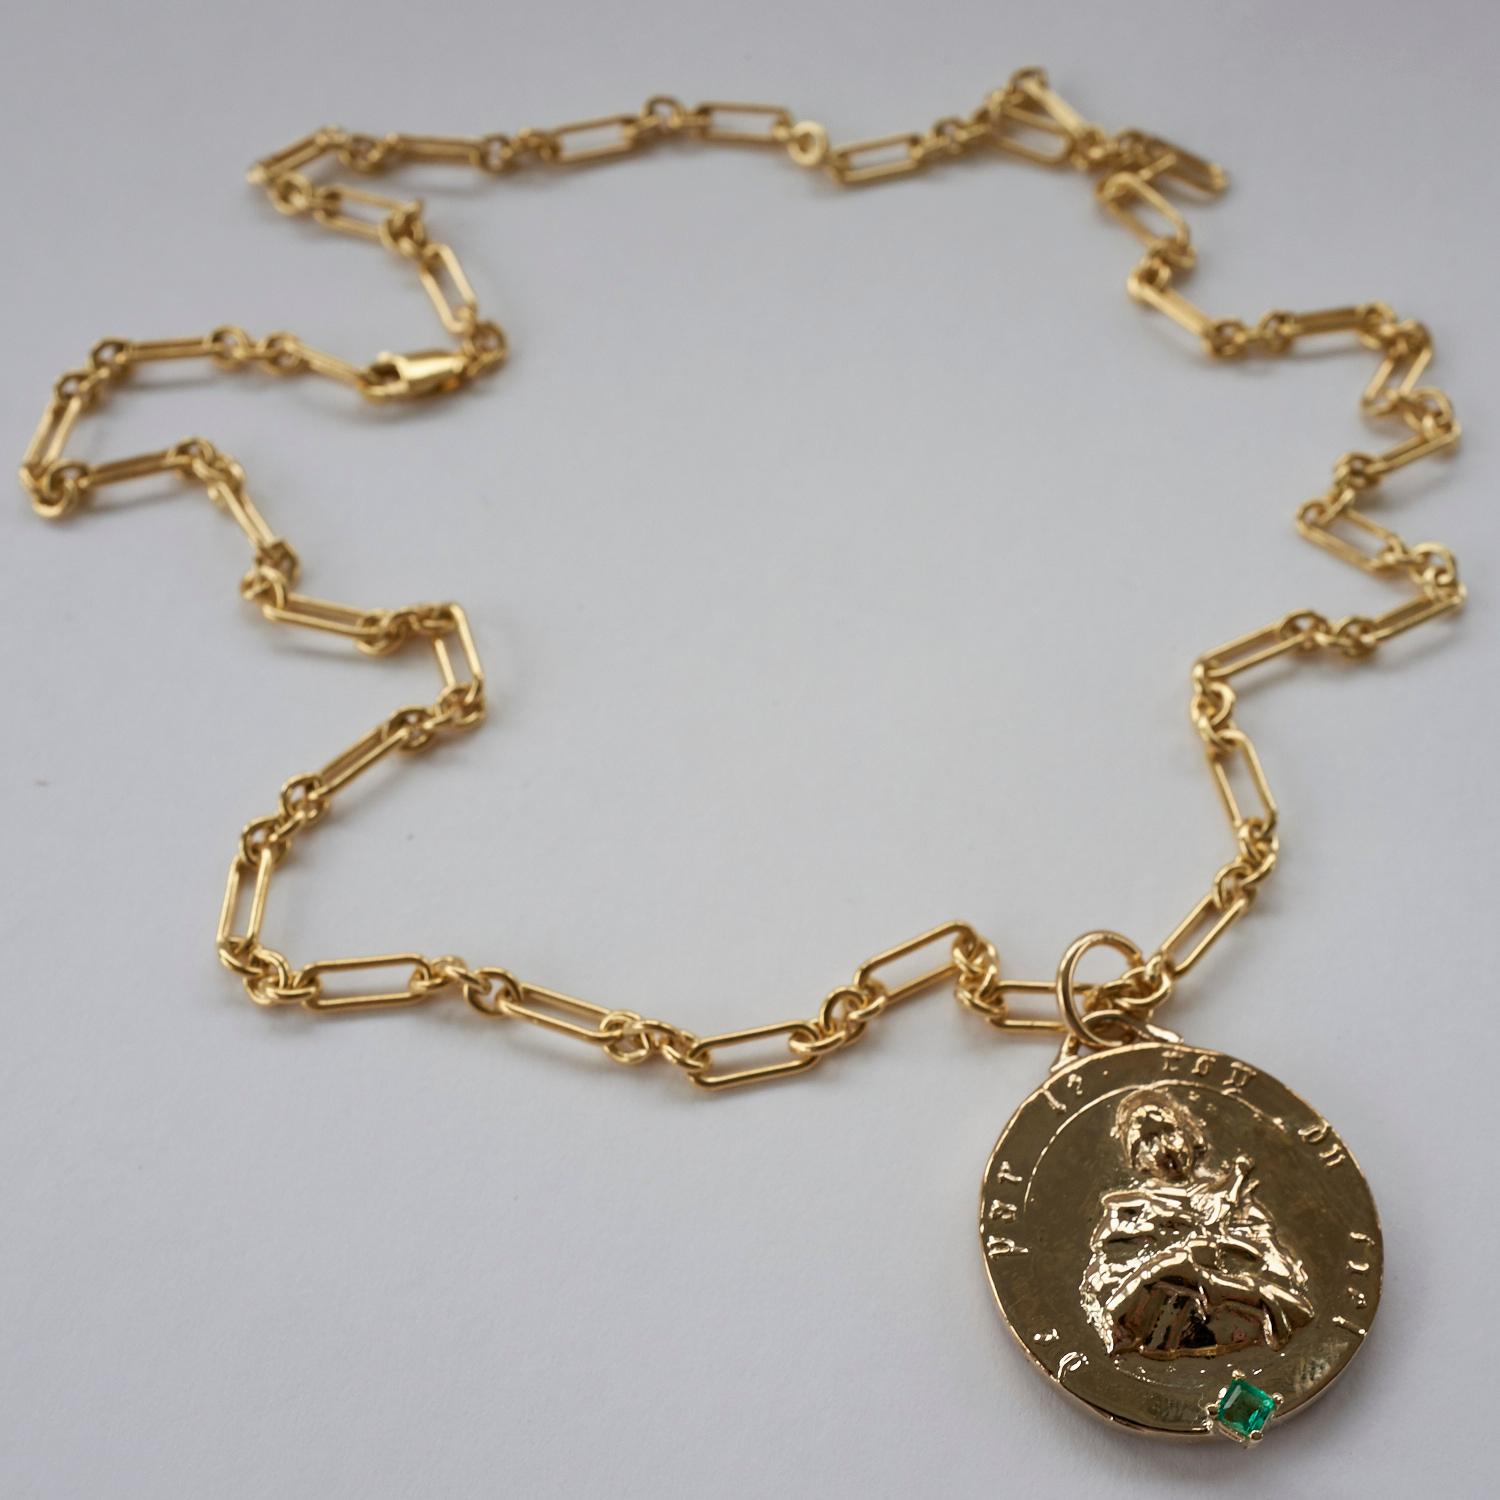 Contemporary Emerald Medal Long Chunky Chain Necklace Saint Joan of Arc J Dauphin For Sale